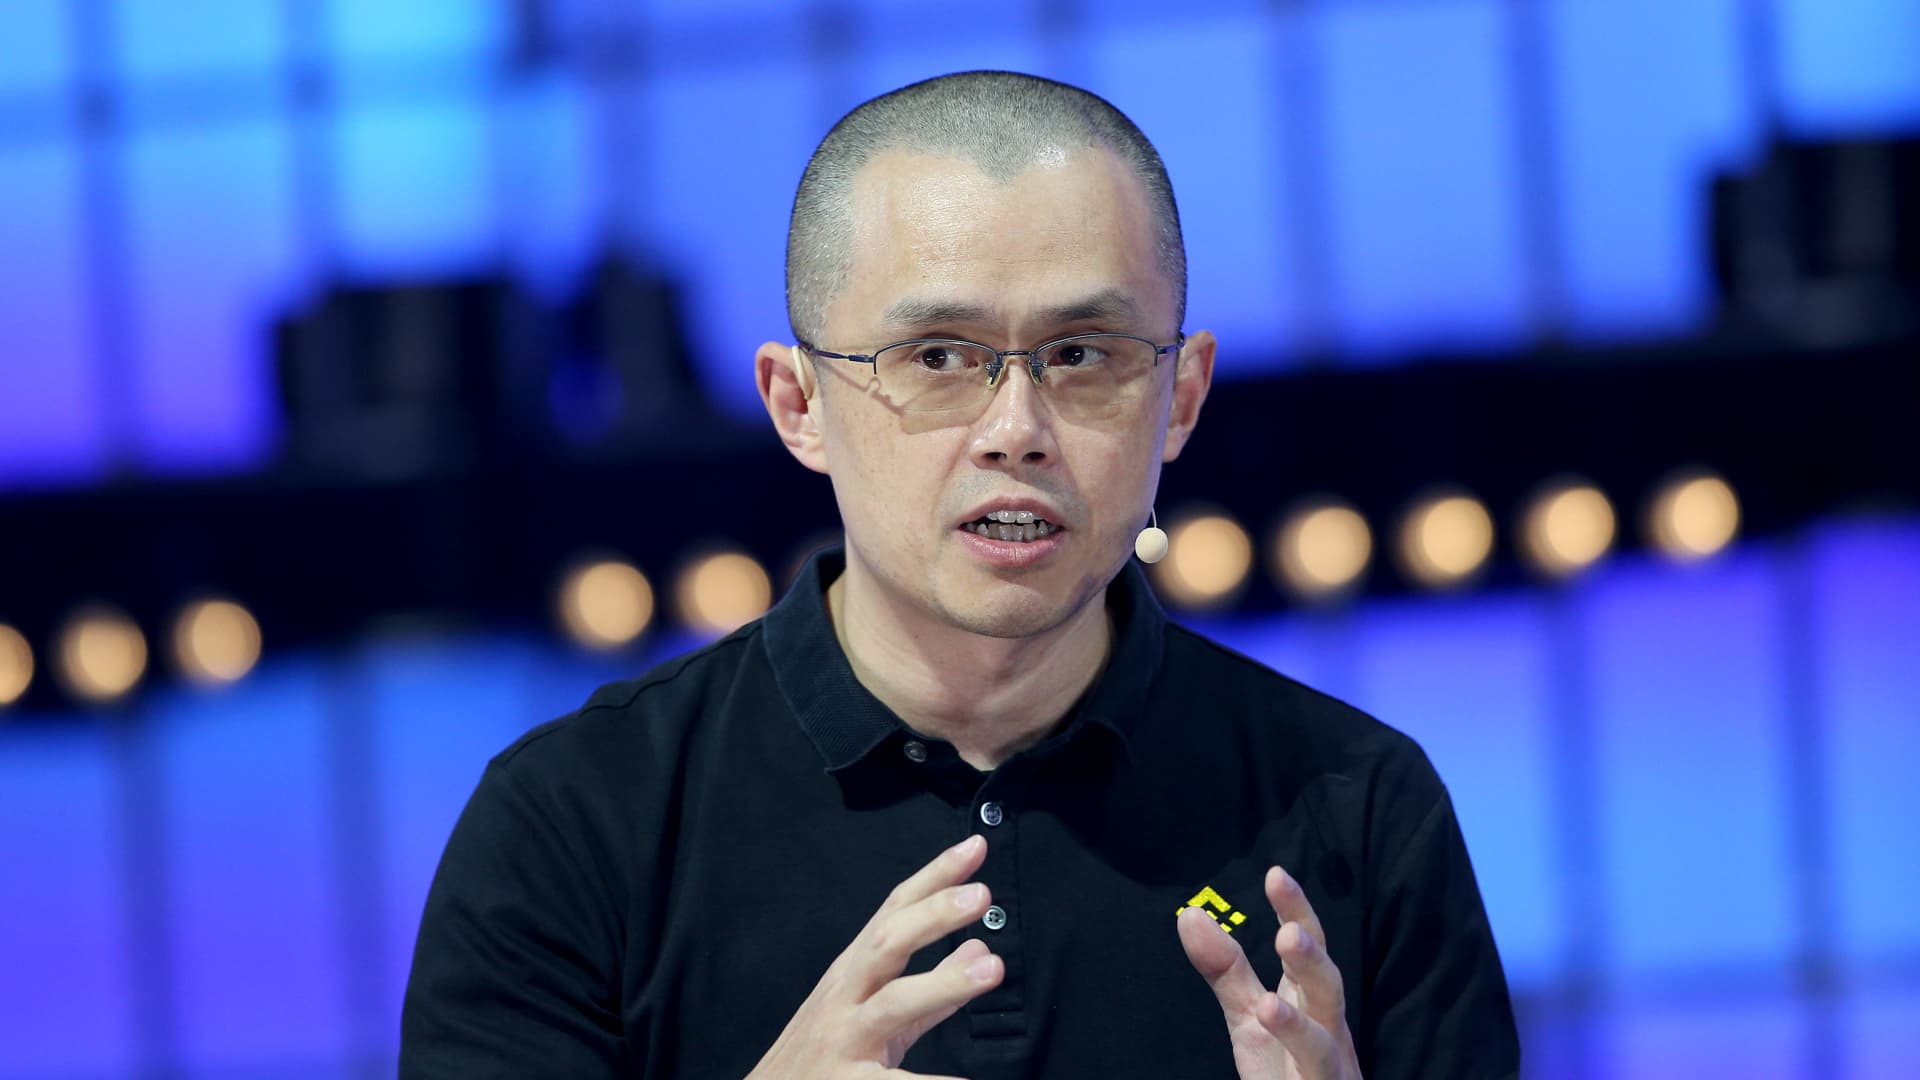 Binance creates $1 billion crypto industry fund after FTX collapse